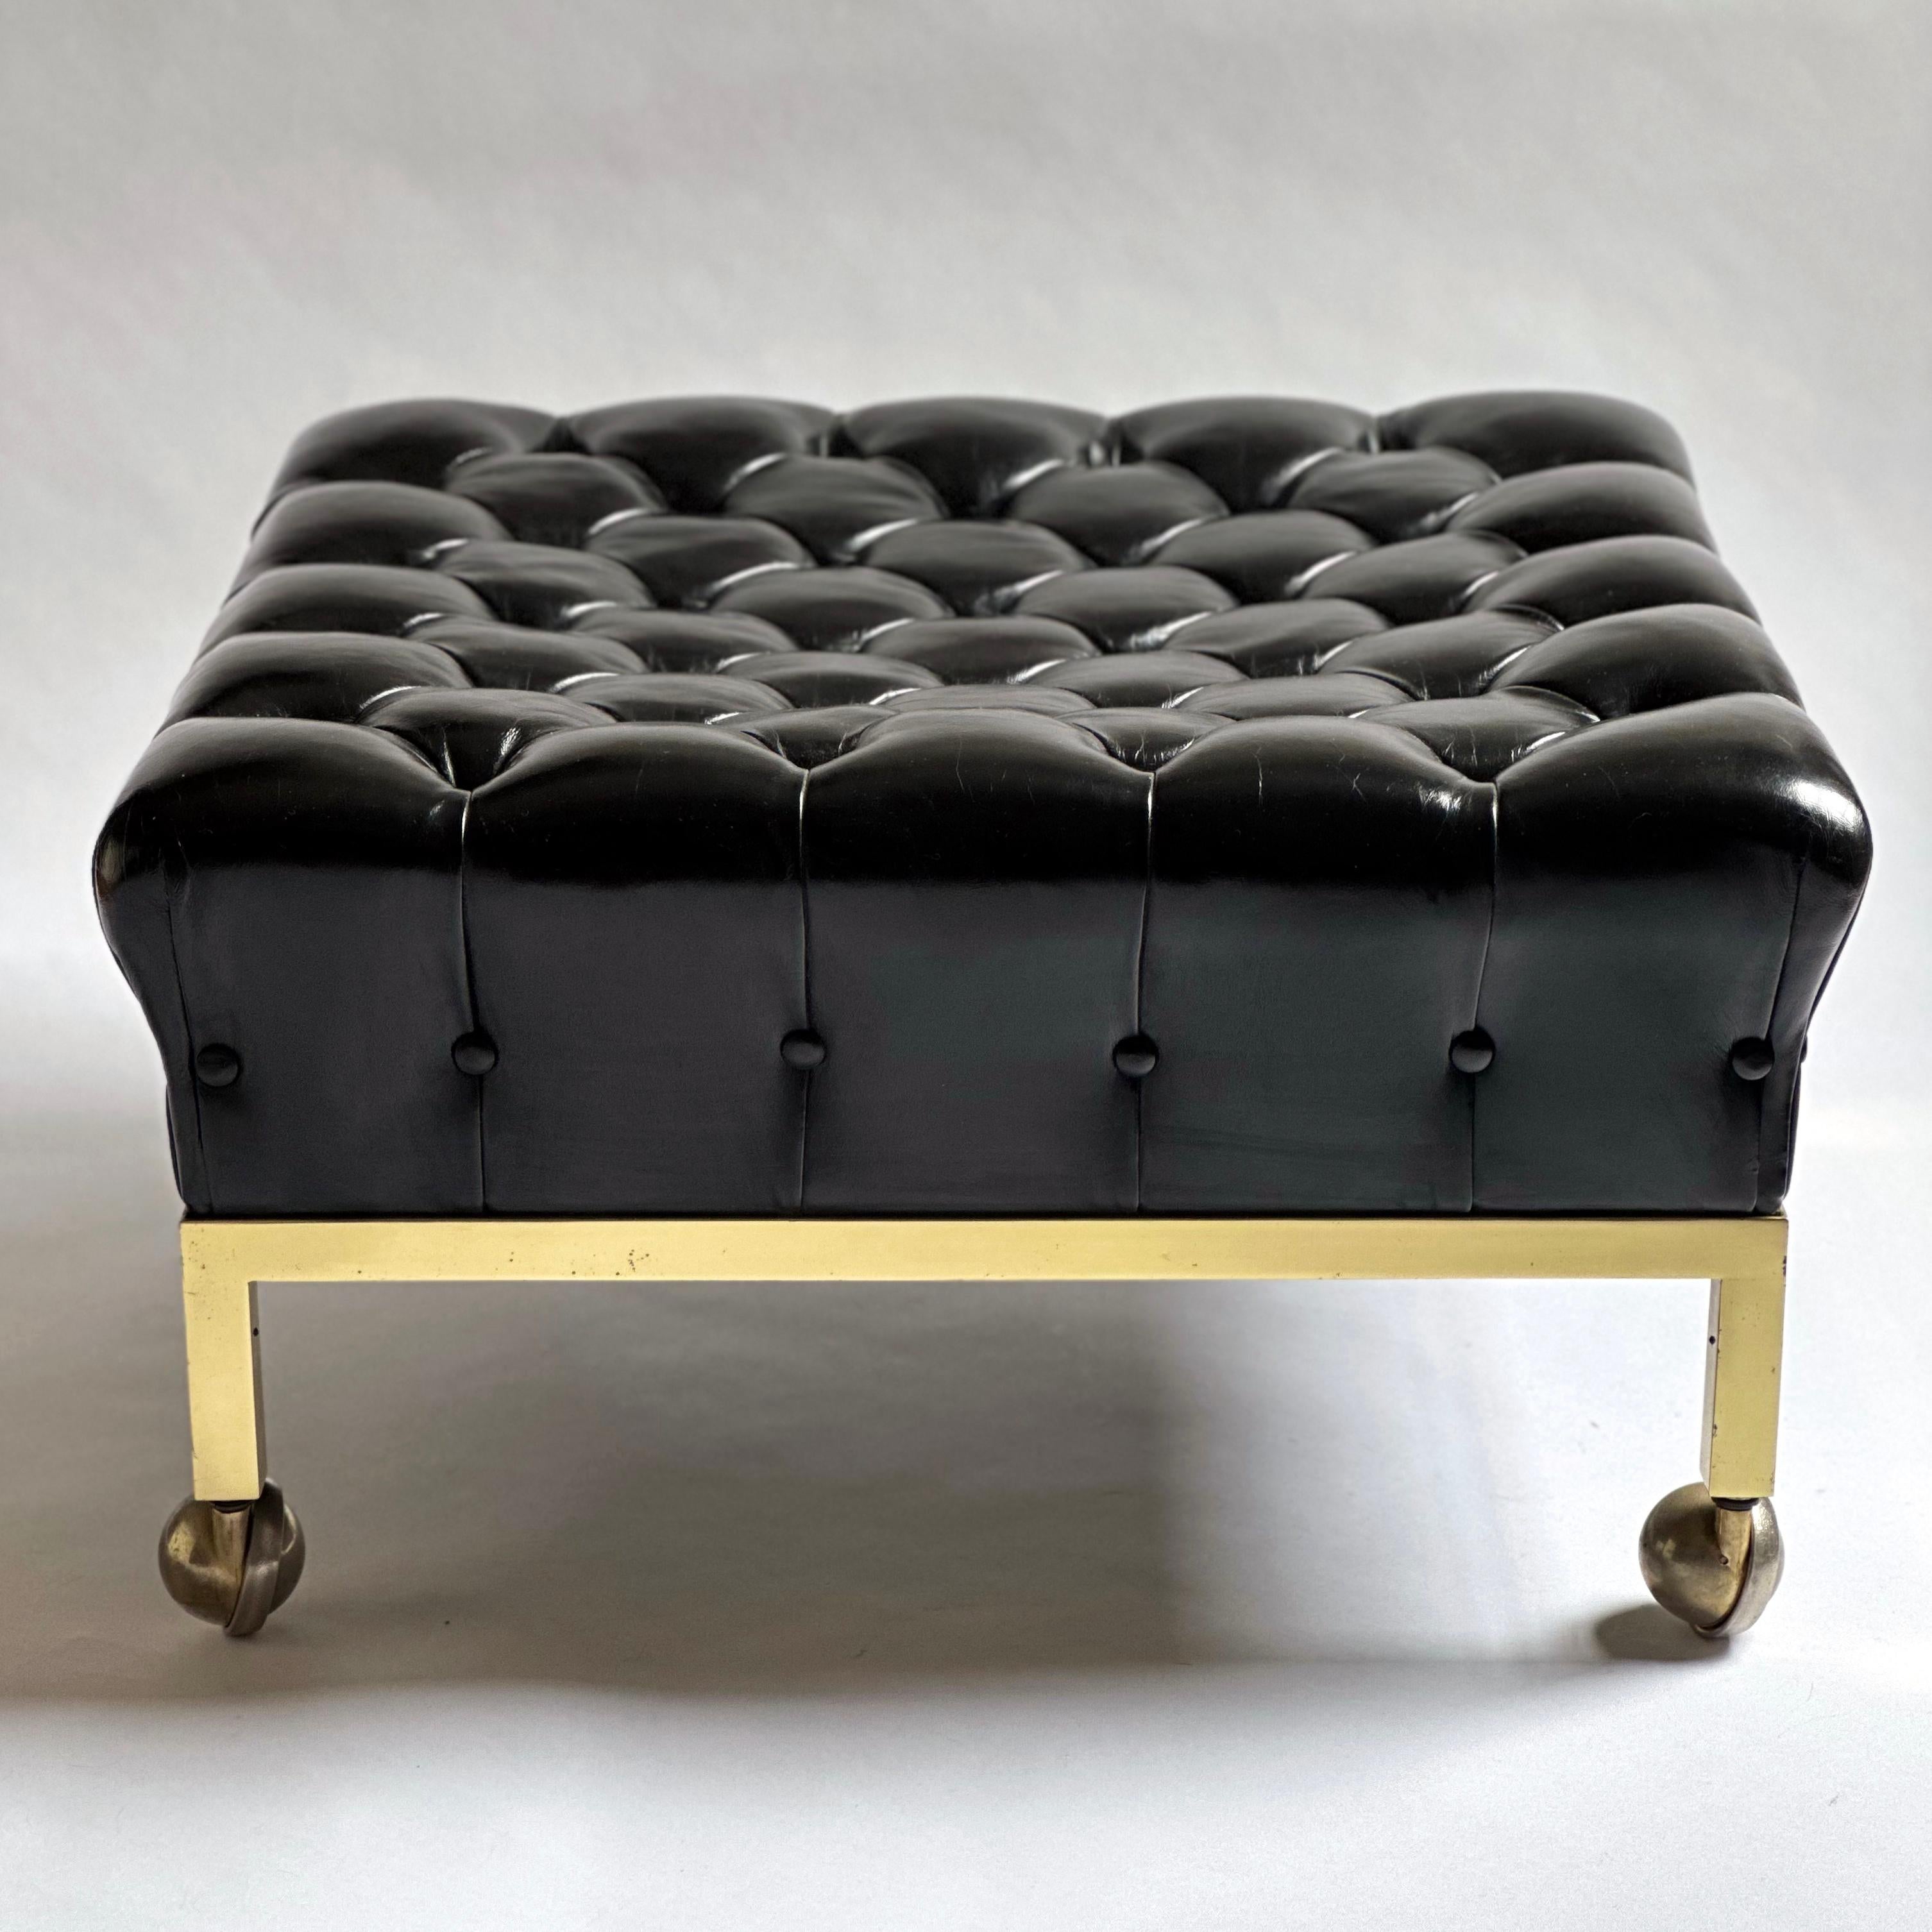 Mid-Century Modern Brass Framed Biscuit Tufted Ottoman in Original Black Leather by Harvey Probber For Sale